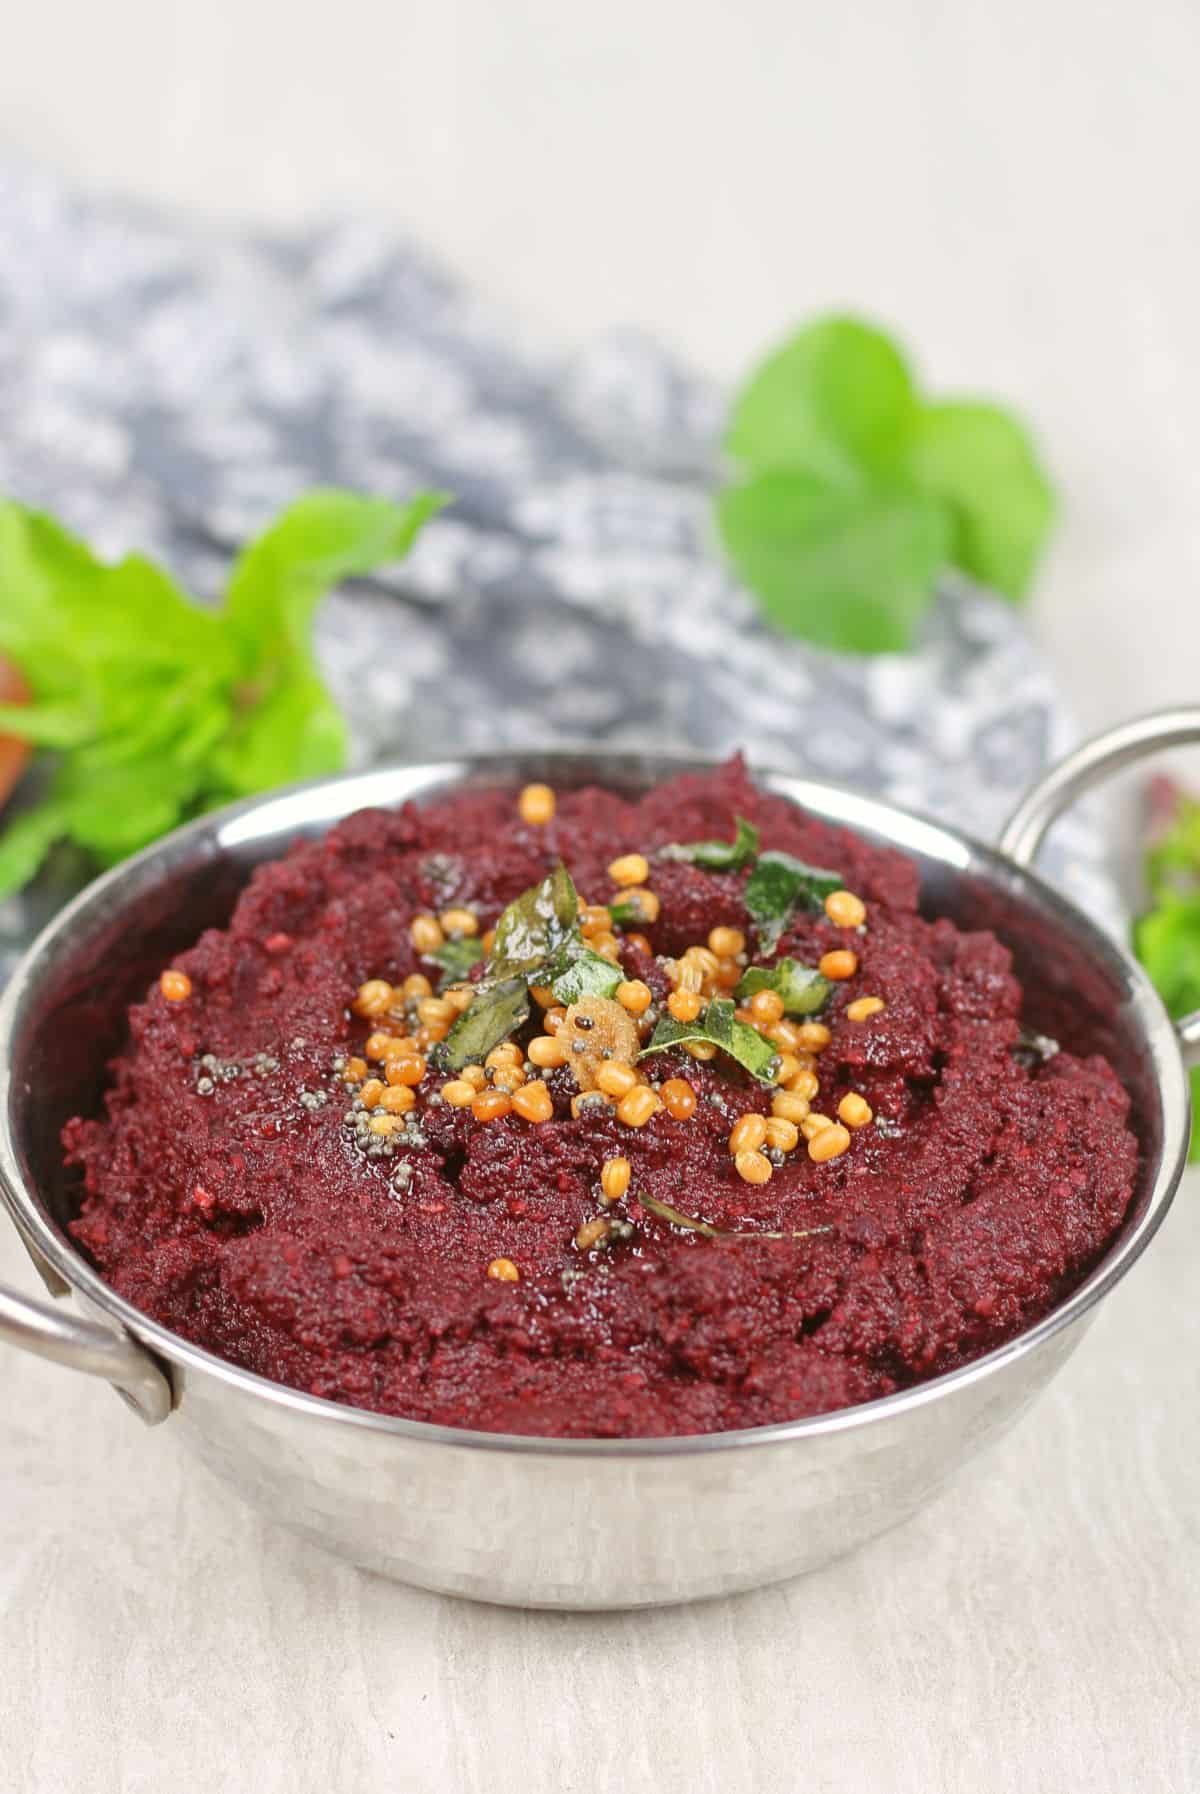 Beetroot thogayal in a bowl